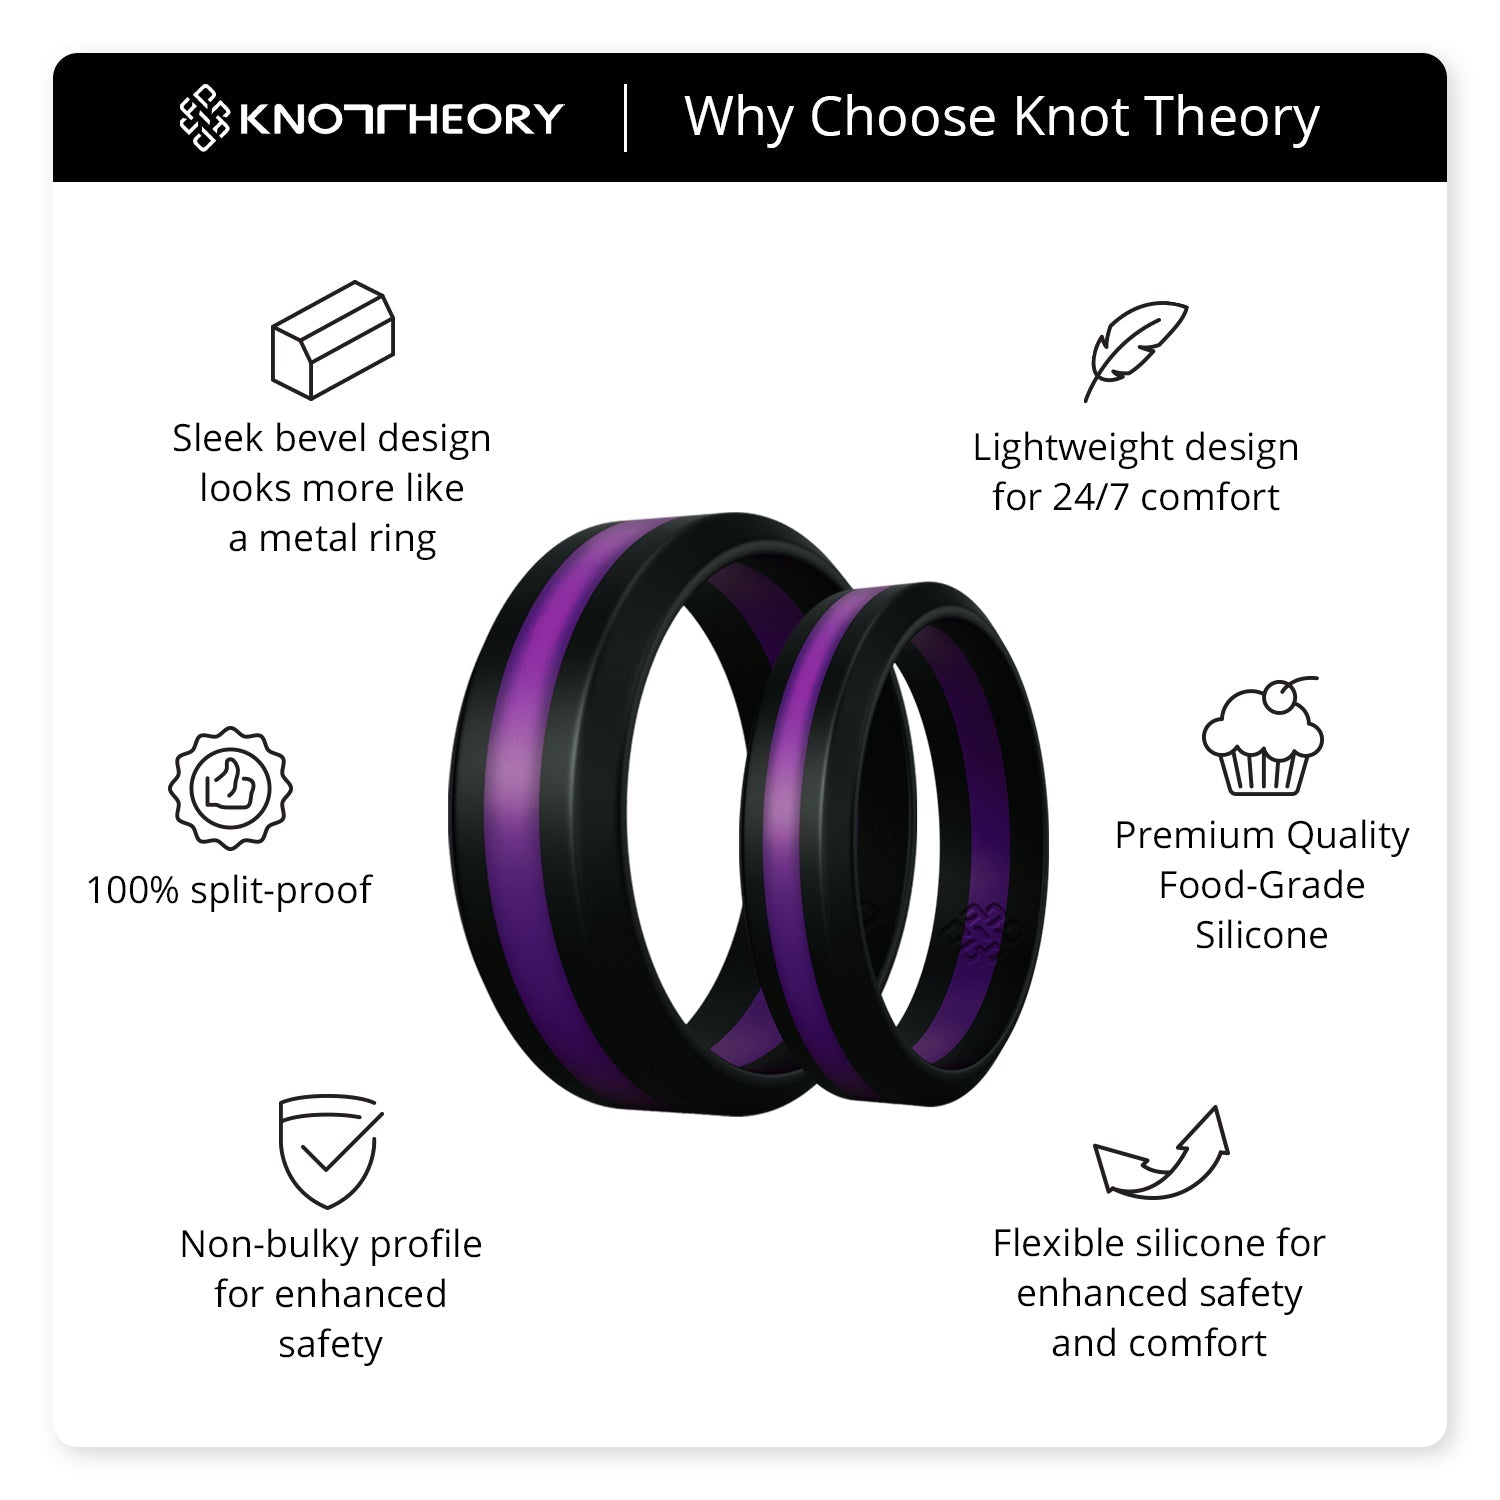 Purple Stripe Silicone Ring for Men and Women - Knot Theory